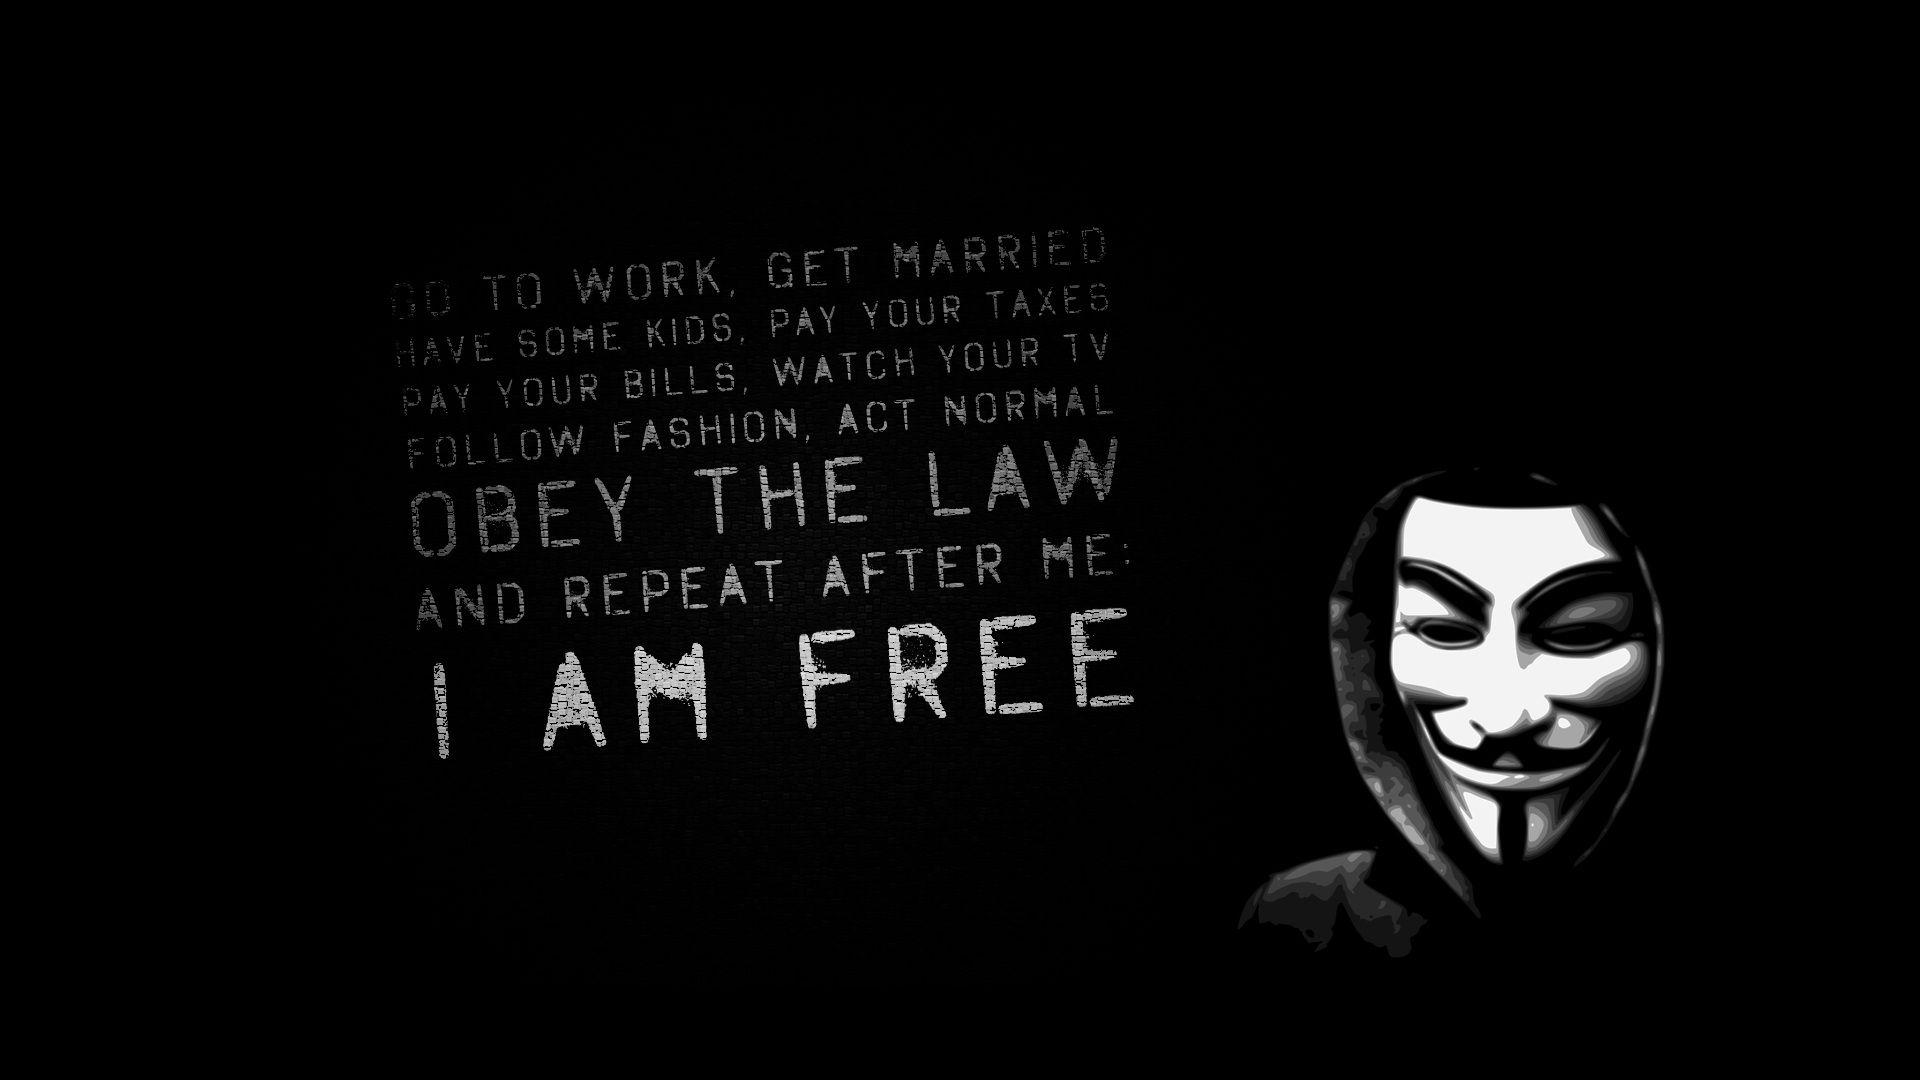 Obey the law desktop PC and Mac wallpaper